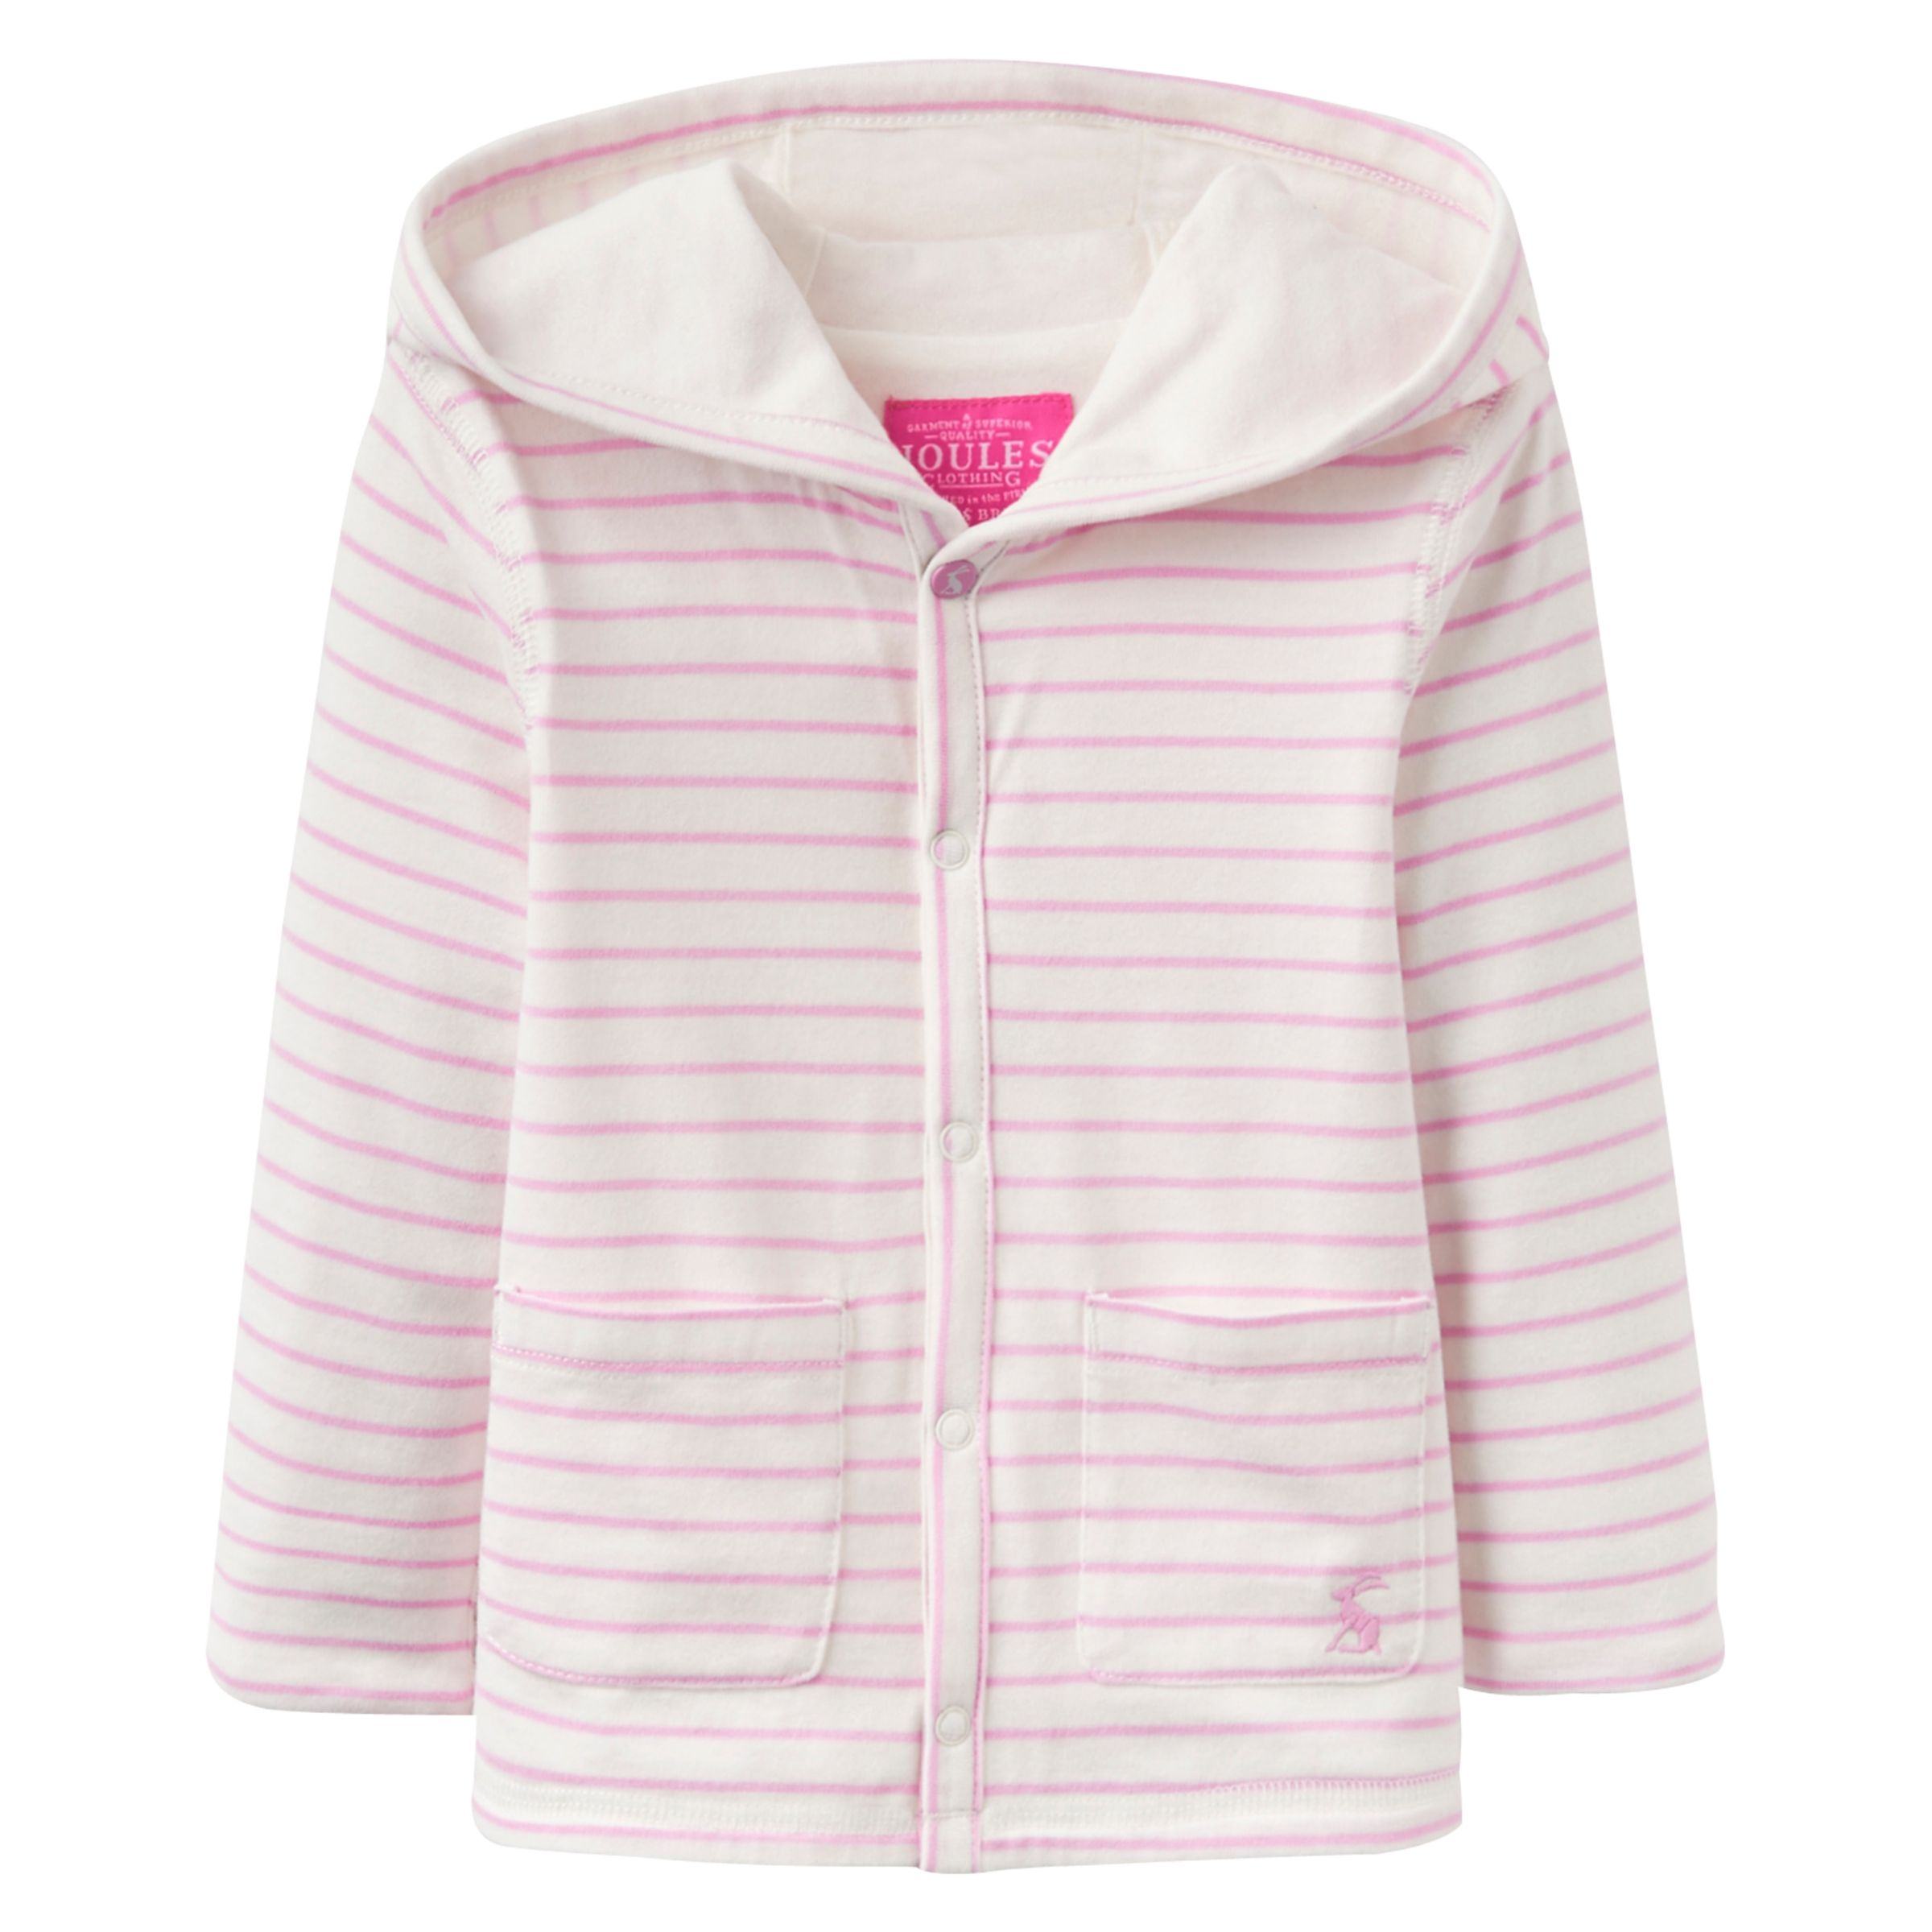 Baby Joule Cuddle Striped Jumper, Pink